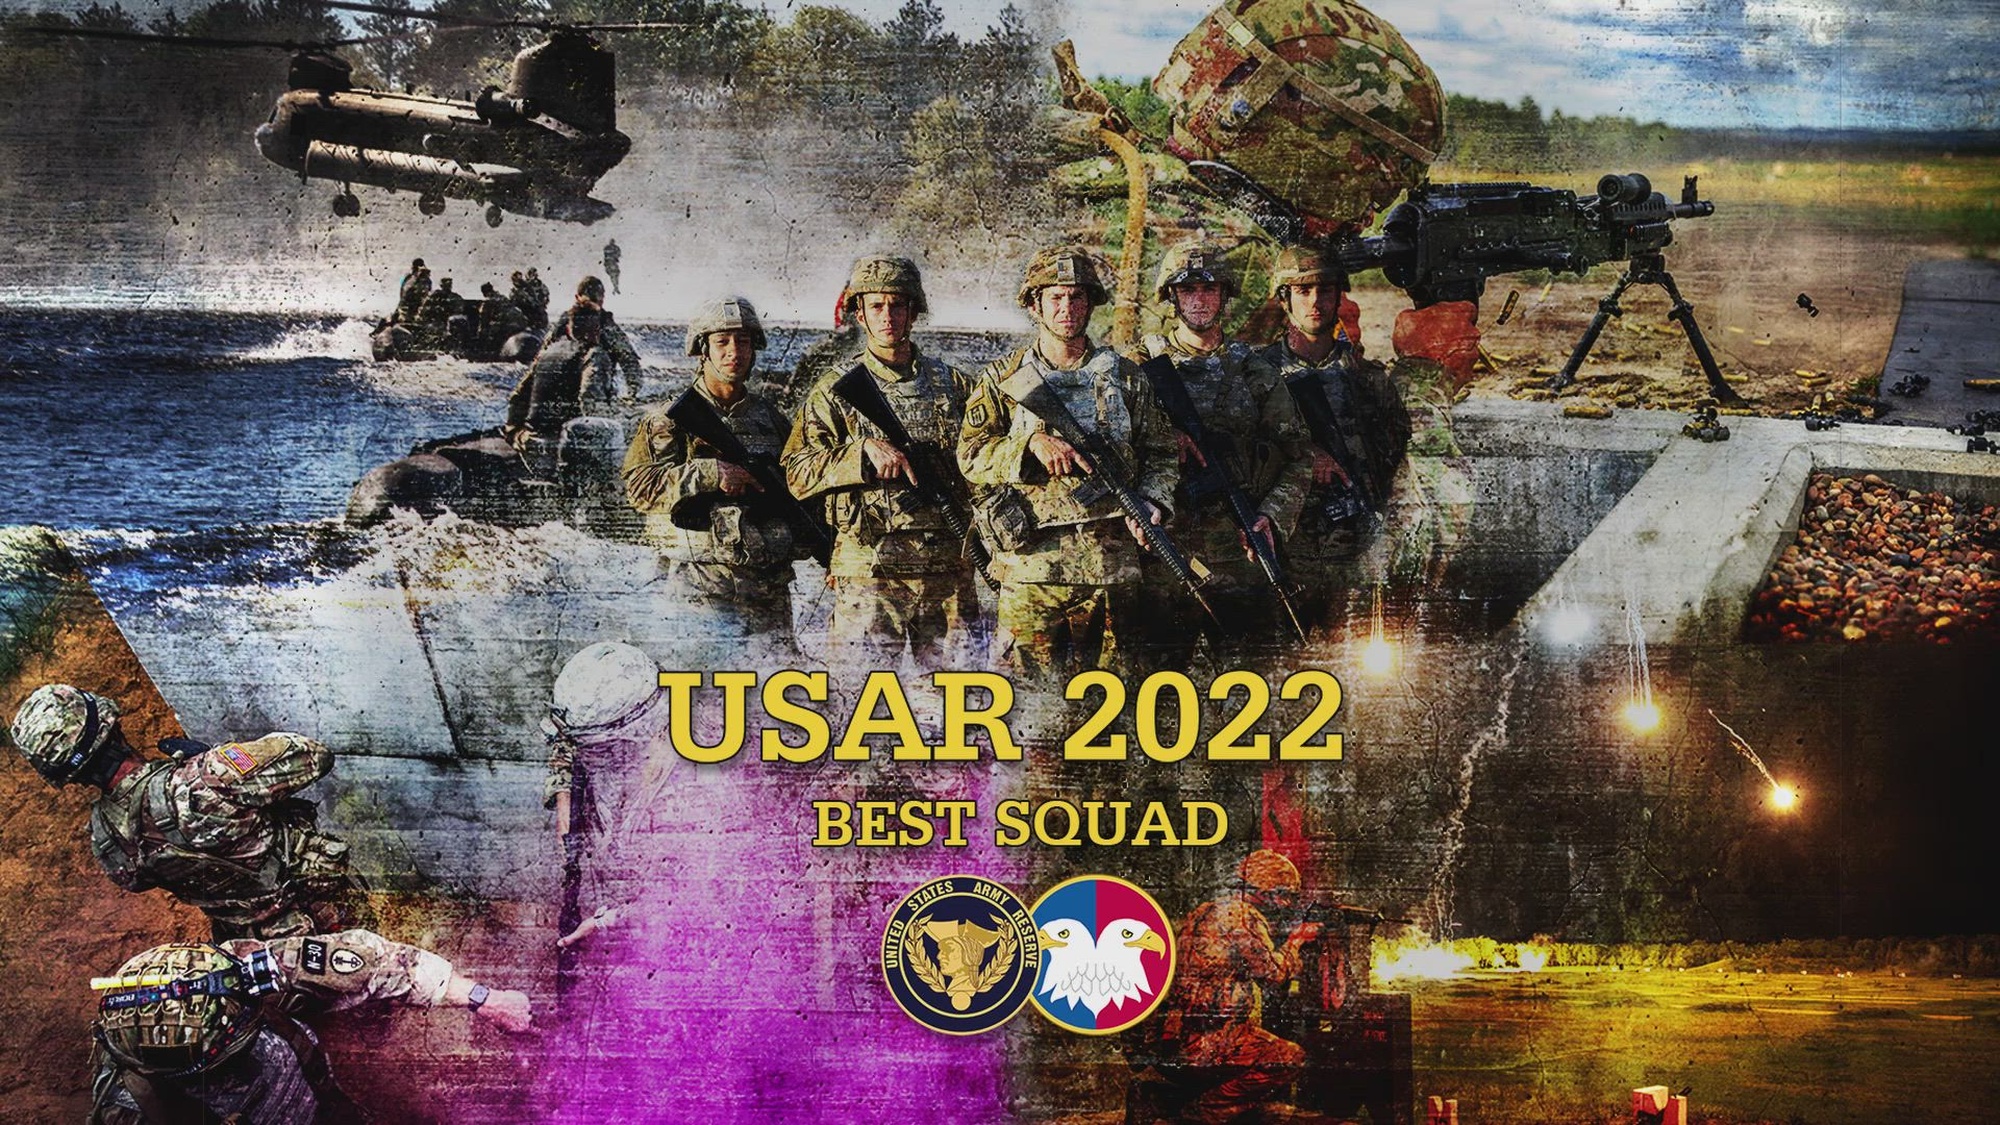 Approximately 40 Soldiers from across the nation traveled to Fort McCoy, Wisconsin, to compete in the 2022 U.S. Best Squad Competition from May 14-21, 2022. The 2022 BSC is an annual competition that brings together the best Soldiers and squads from across the U.S. Army Reserve to earn the title of "Best Warrior" and "Best Squad" among their peers. Competitors are evaluated on their individual and collective ability to adapt to and overcome challenging scenarios and battle-focused events that test their technical and tactical abilities under stress and extreme fatigue.